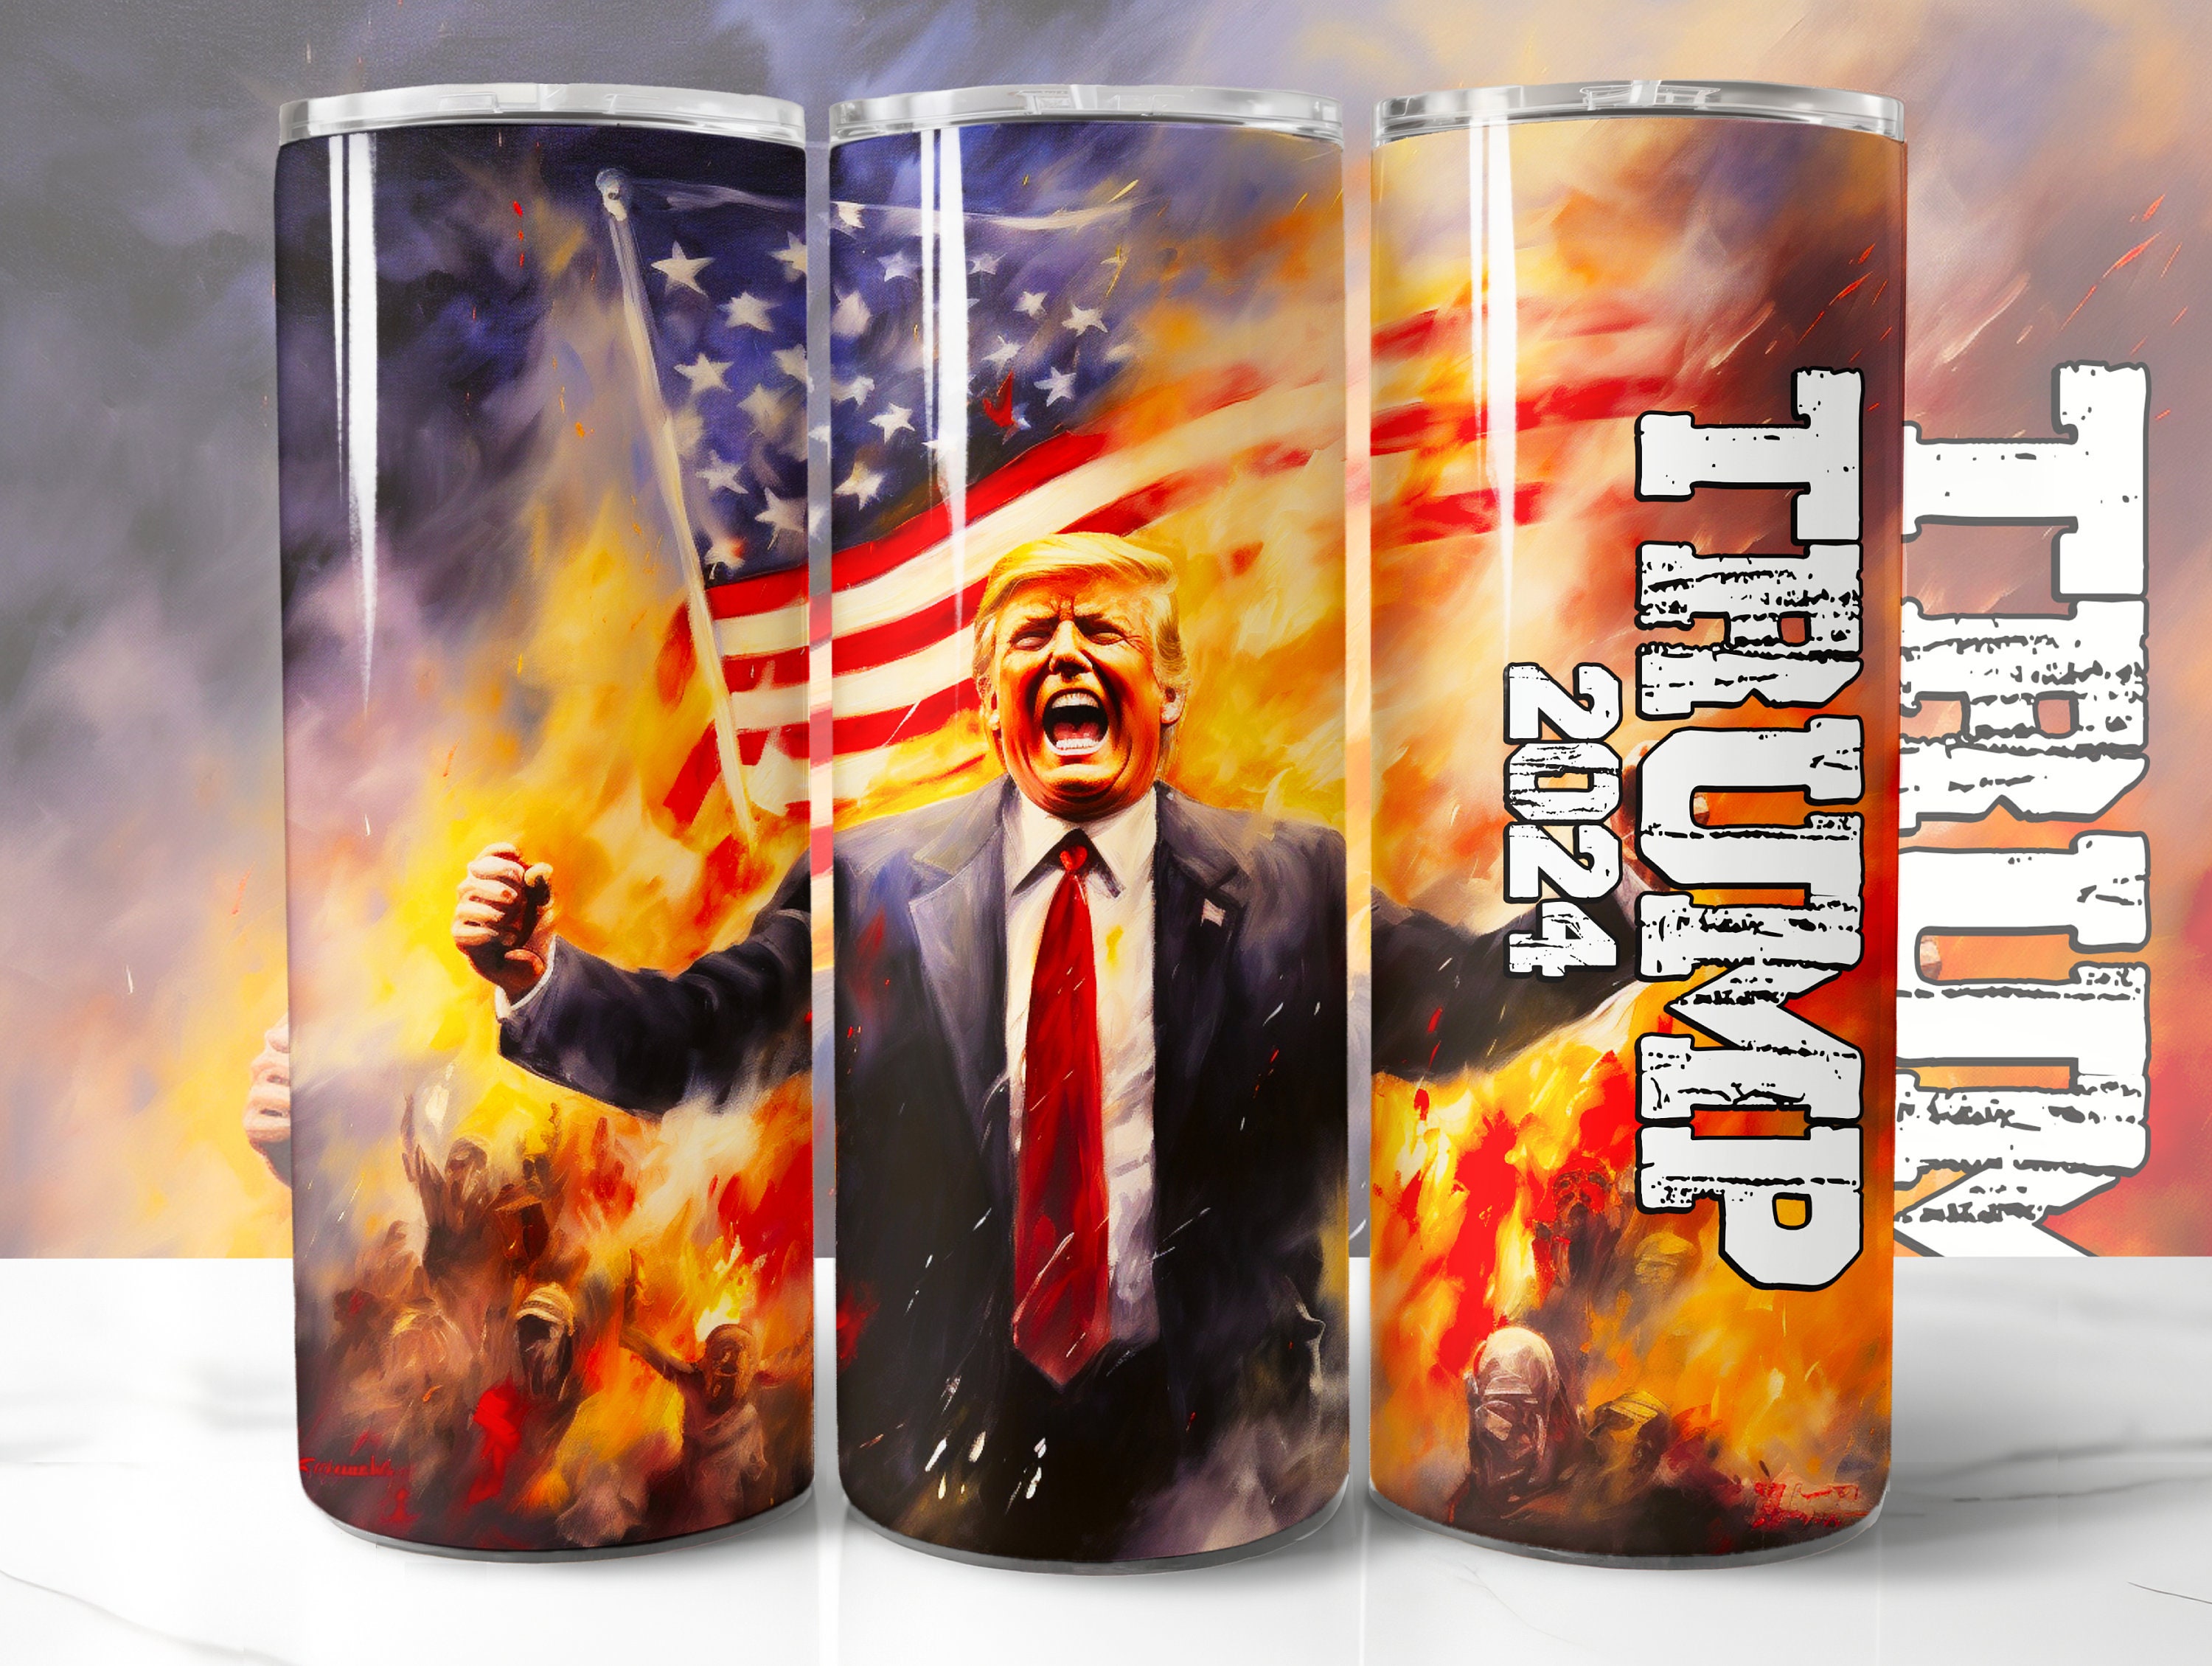 LIMITED EDITION: Trump Indictment Victory Tour 2024 Tumbler 20oz